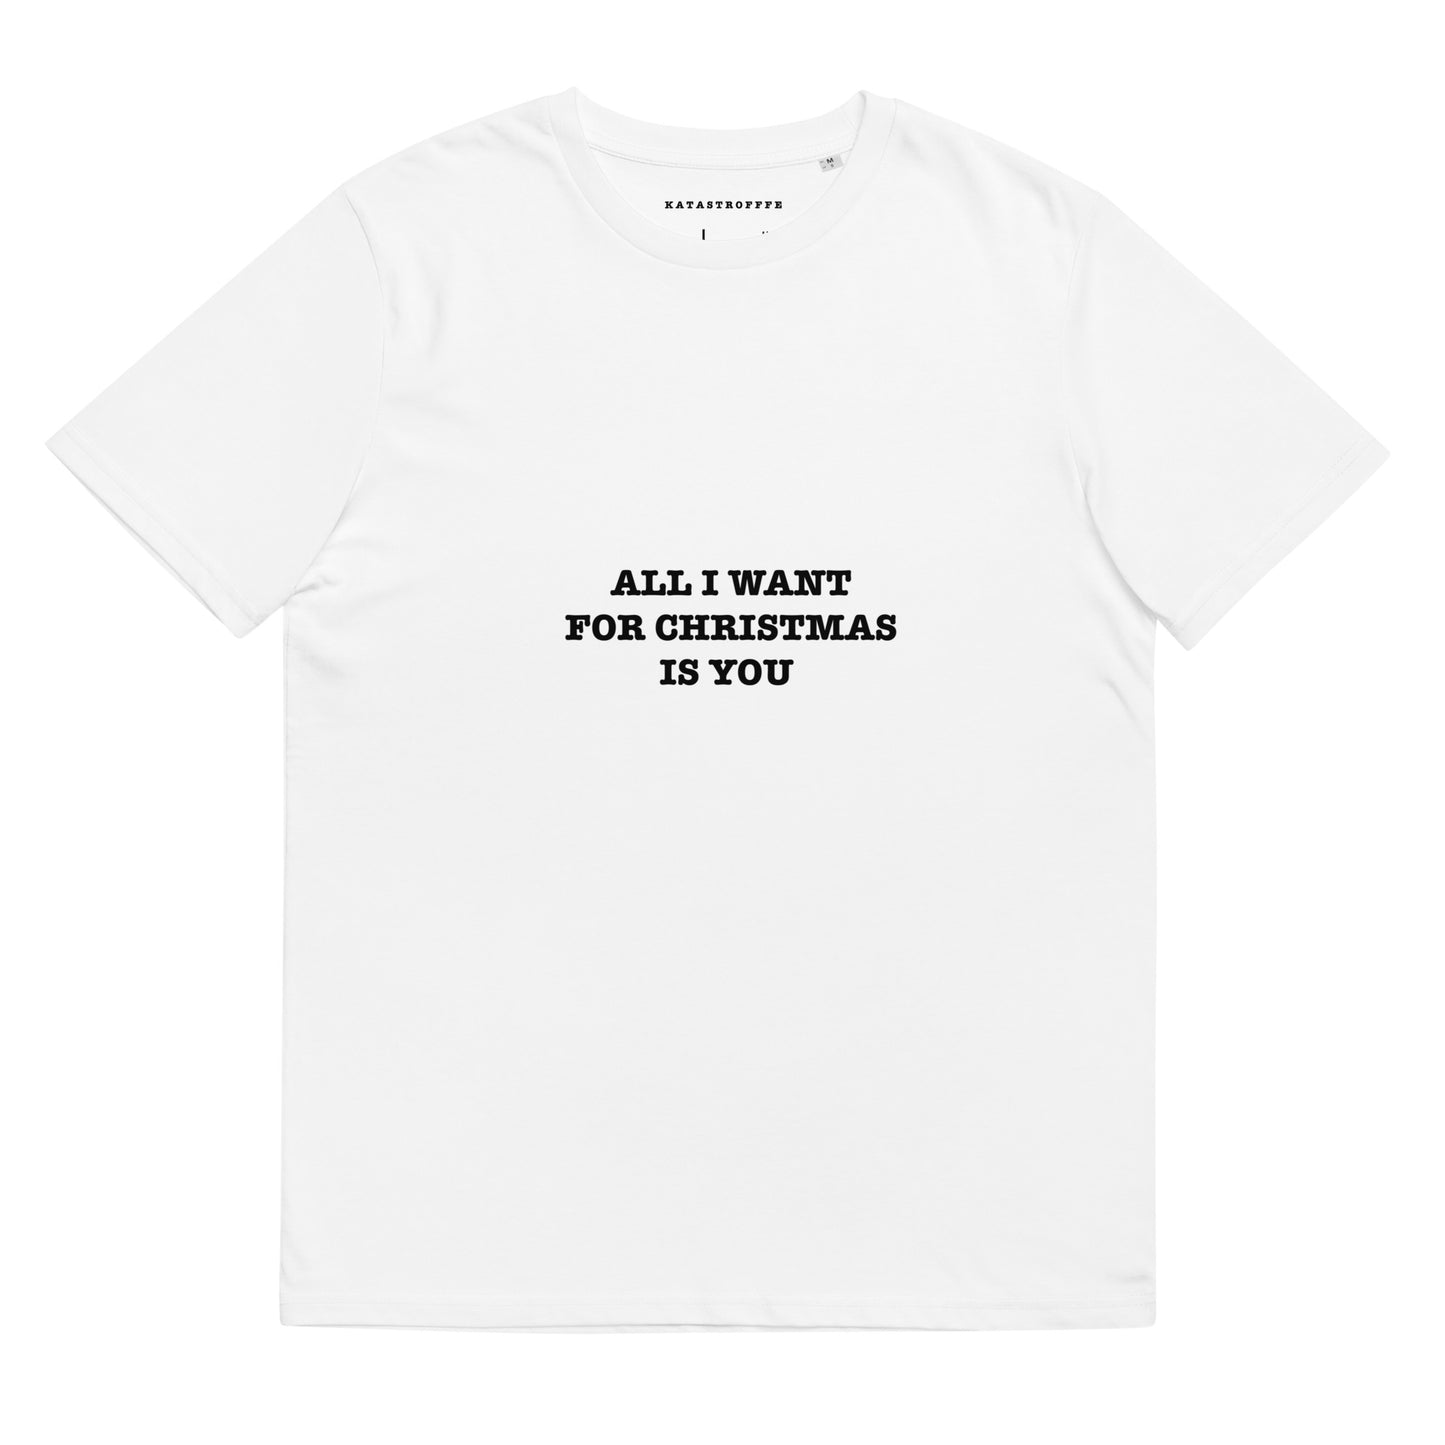 ALL I WANT FOR CHRISTMAS IS YOU KATASTROFFFE Unisex organic cotton t-shirt